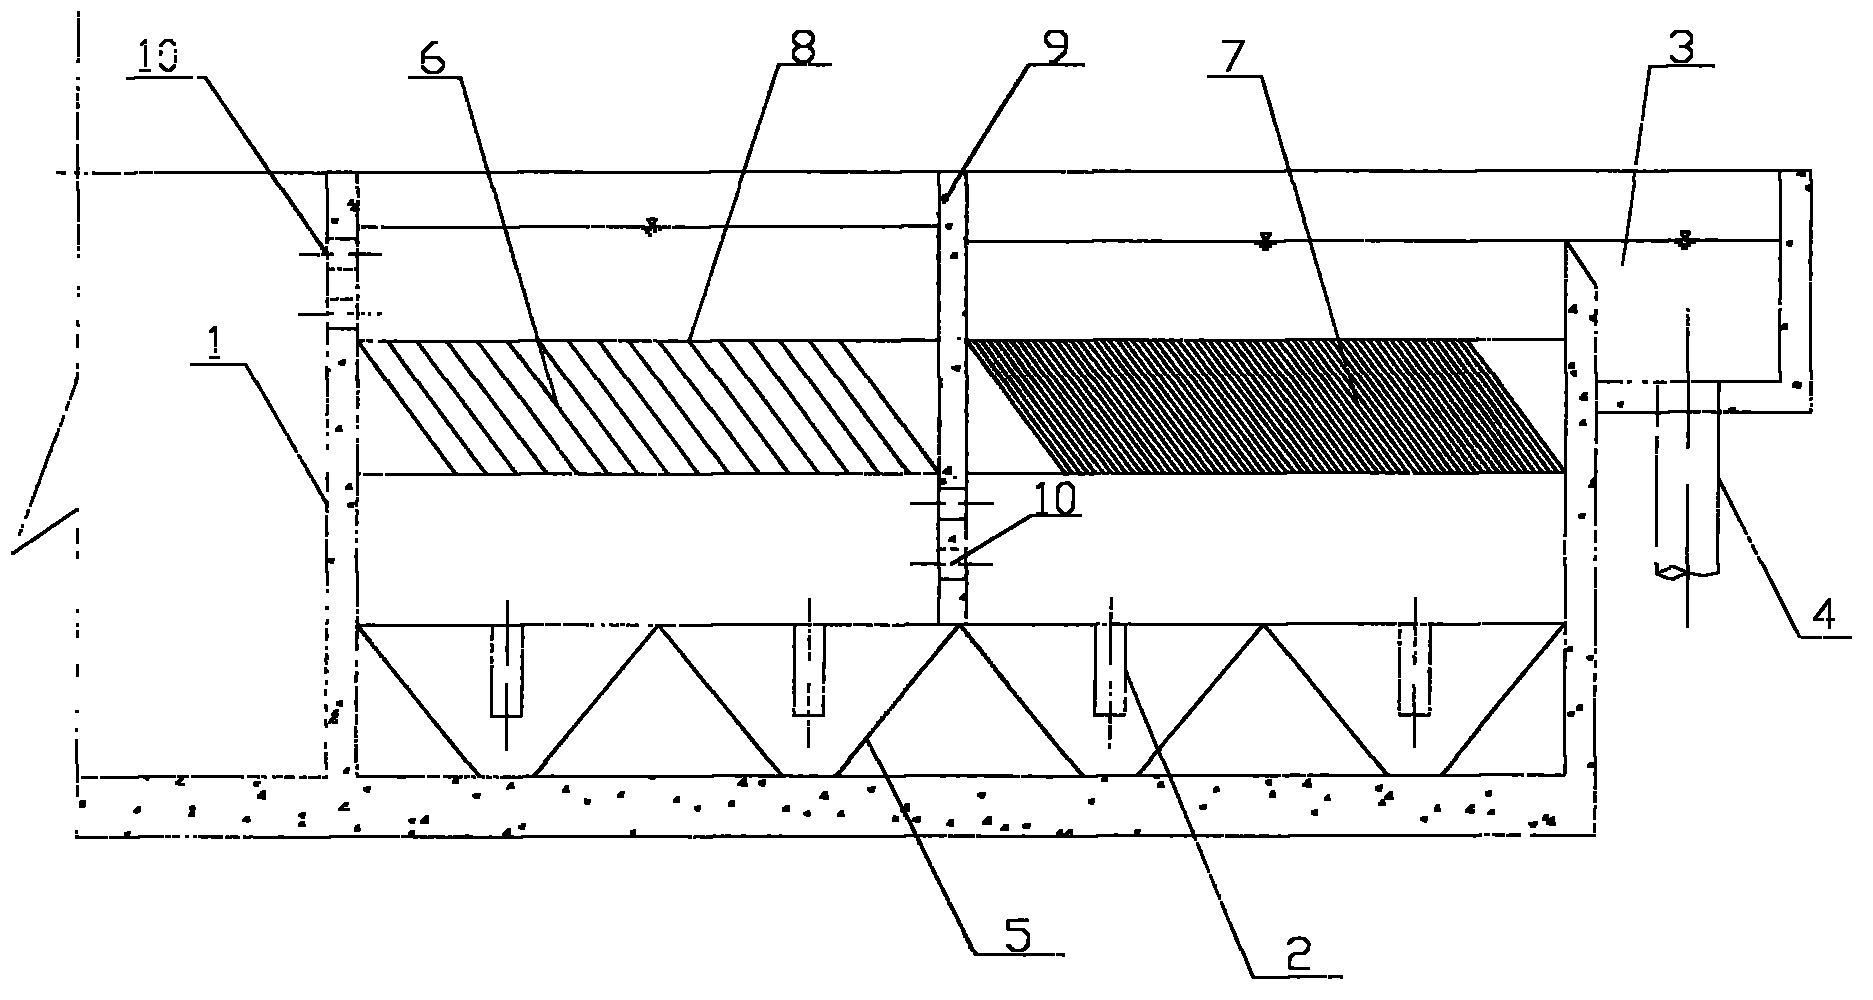 Bidirectional flow variable-spacing inclined plate sedimentation tank